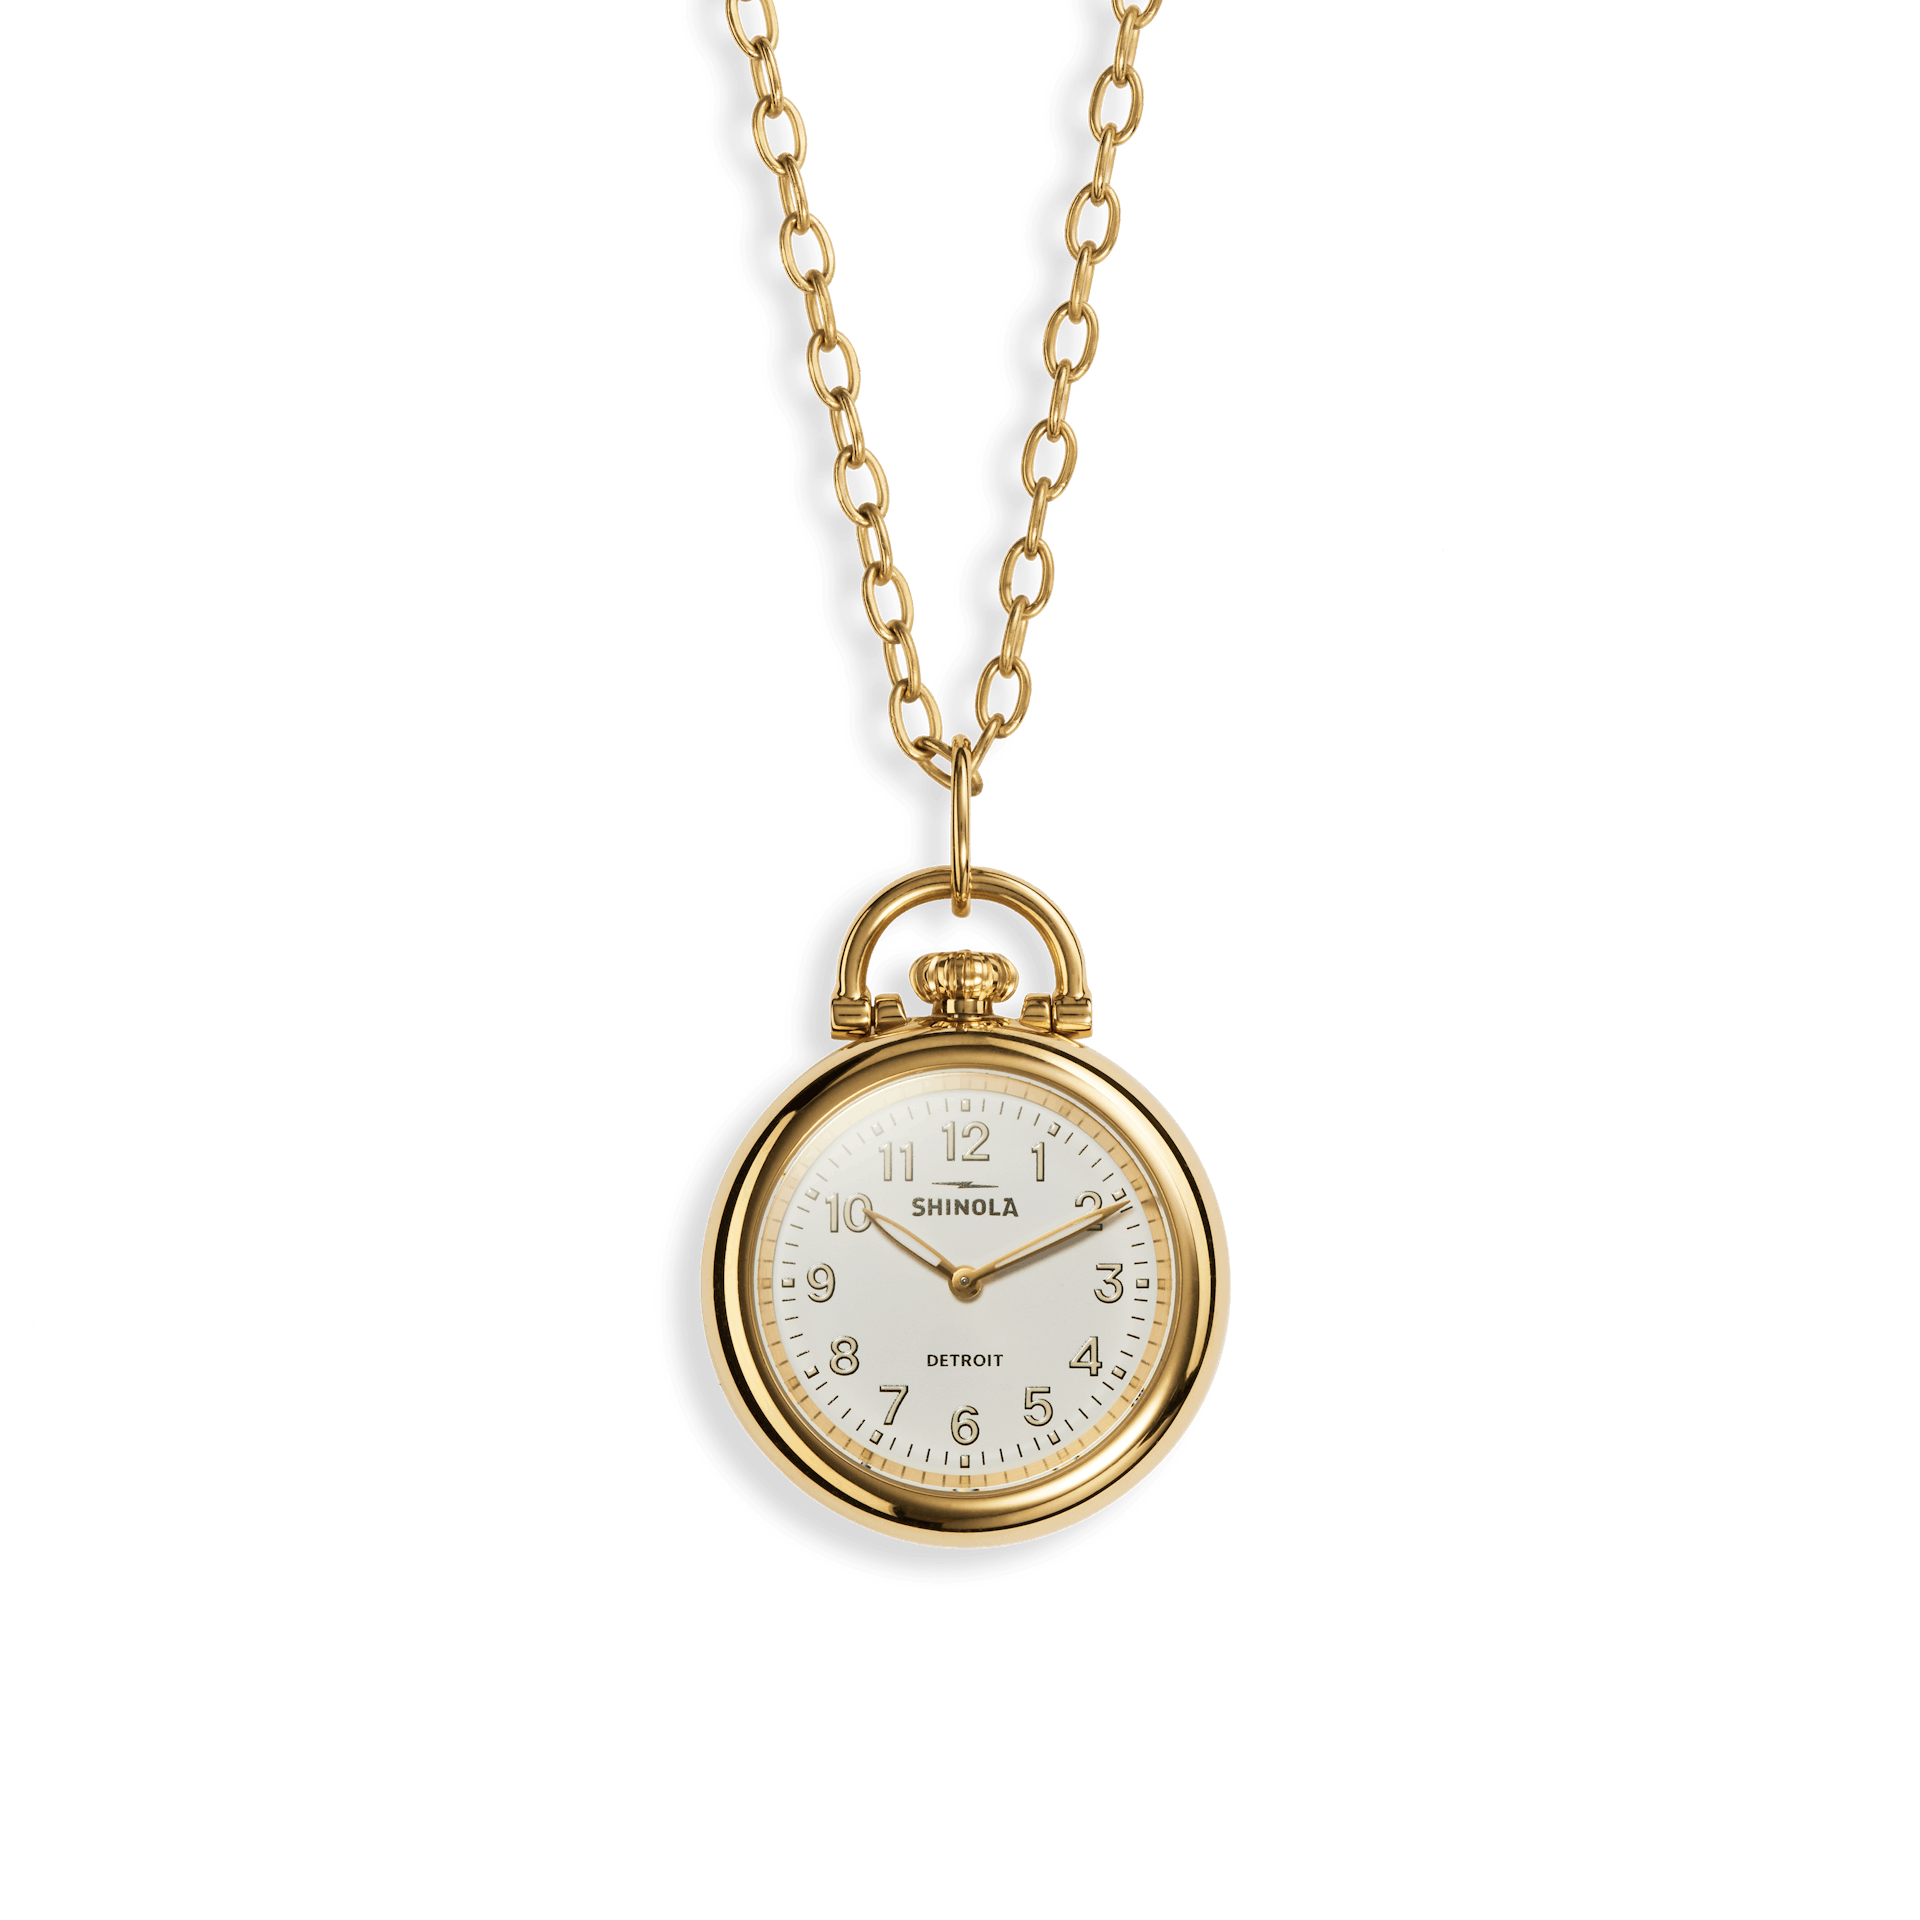 Old Pocket Watch and Chain, Vintage Locket Watch with Retro Key Stock Photo  - Image of lock, chain: 137967474